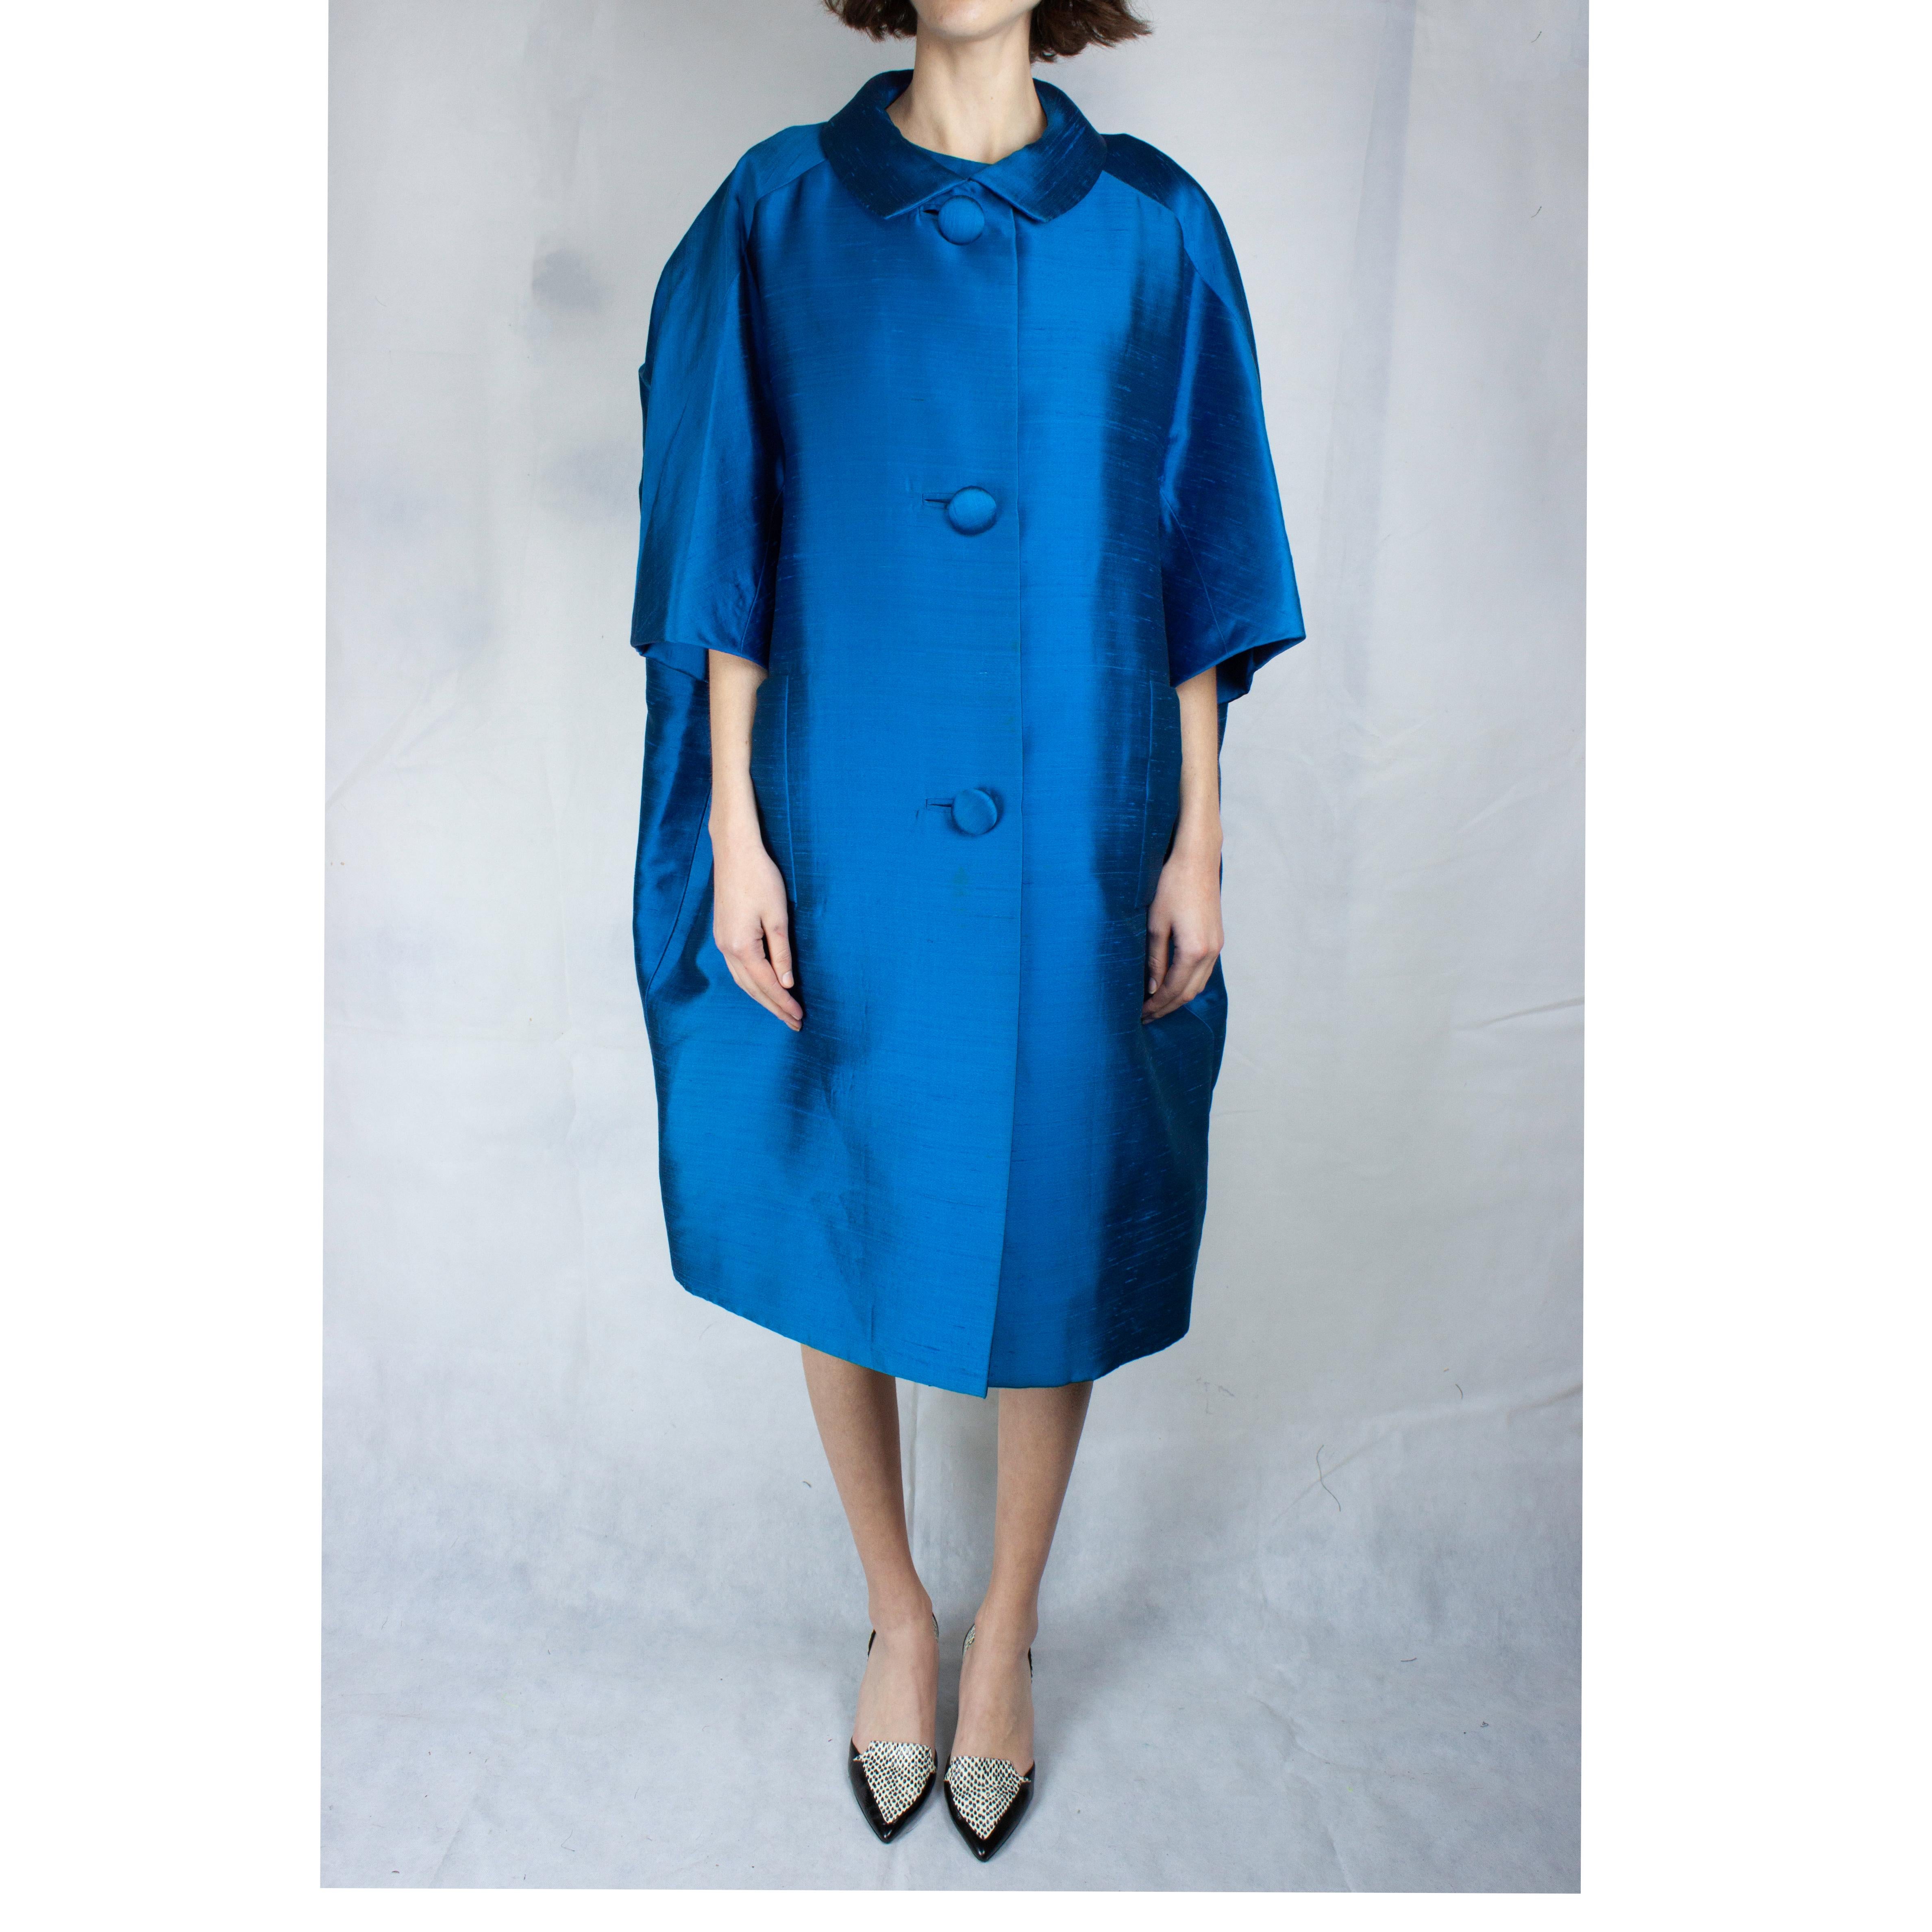 
This complexity tailored Christian Dior ensemble is constructed with a lustrous turquoise raw silk dupion material. The coat features a round silhouette tailoring, round turndown collar and two vertical pockets on the hip. The piece fasten with a